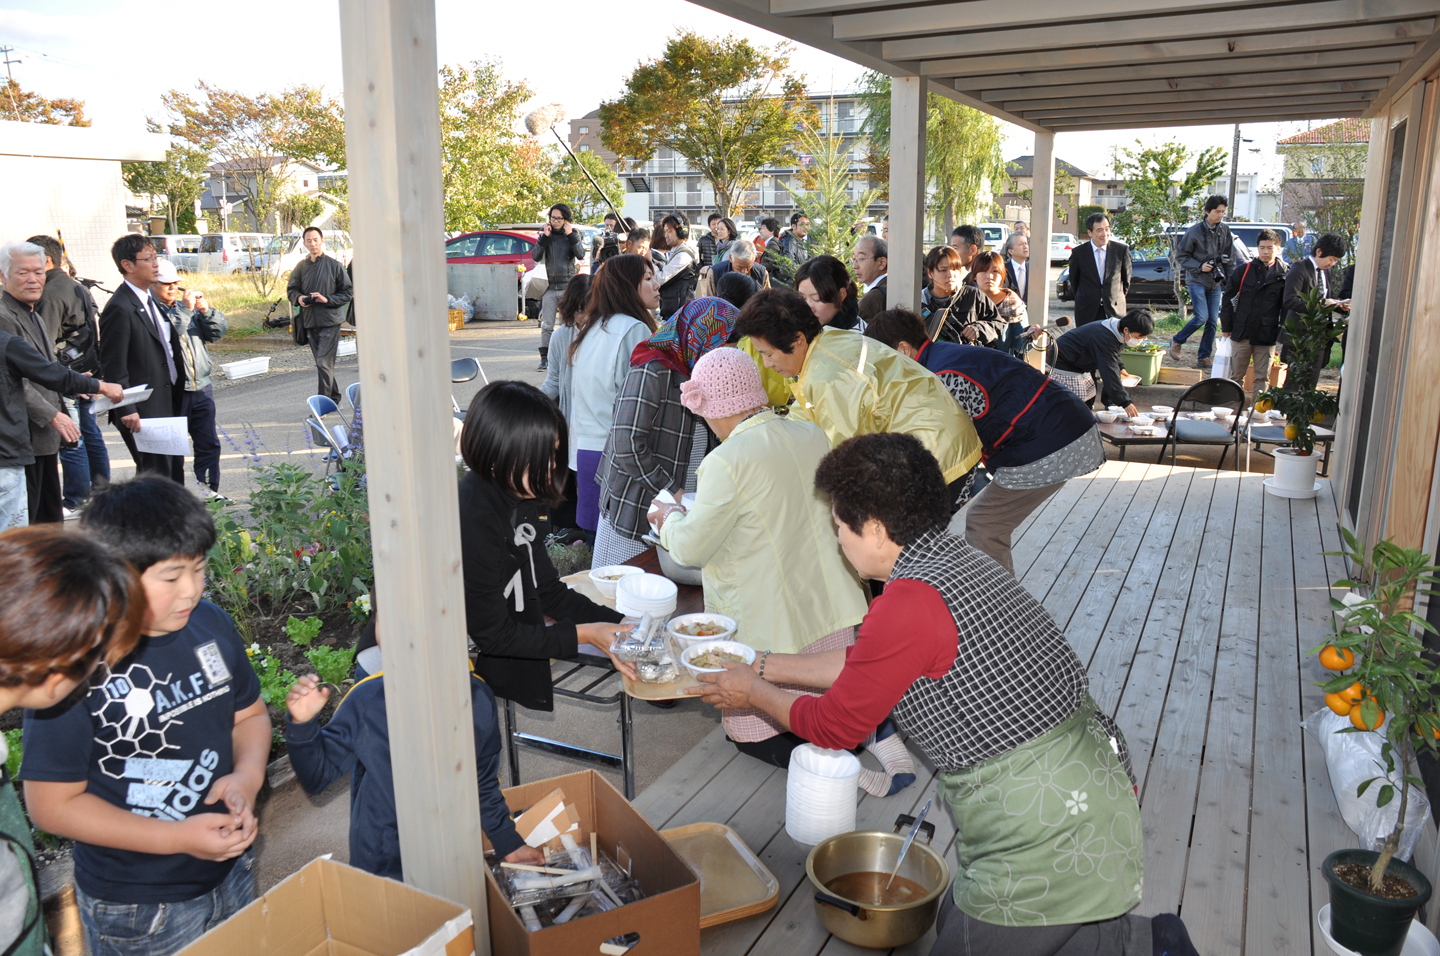 Sendai_3_People-living-in-the-temporary-house-served--traditionl-soup-after-the-ceremony.jpg